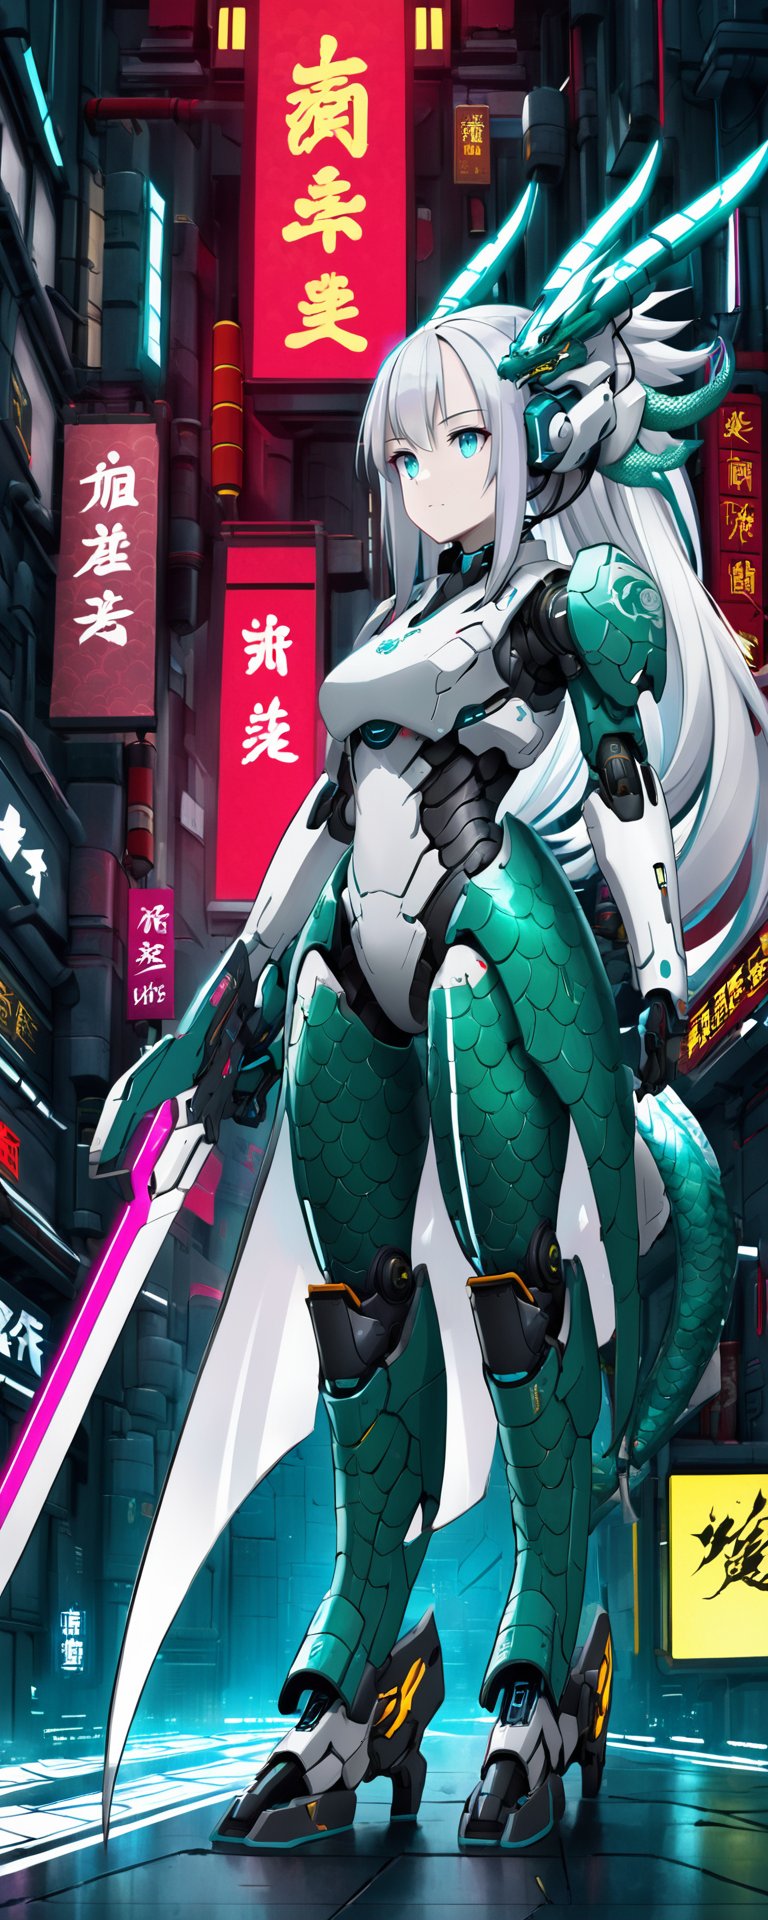 Full body,  outer_space,  robot female, human face, dragon skin, dragon scale pattern ,holding dragon head weapon, with long white hair,dragon-themed, complex background:1.1,Chinese Dragon,Mecha,Cyberpunk,Katon